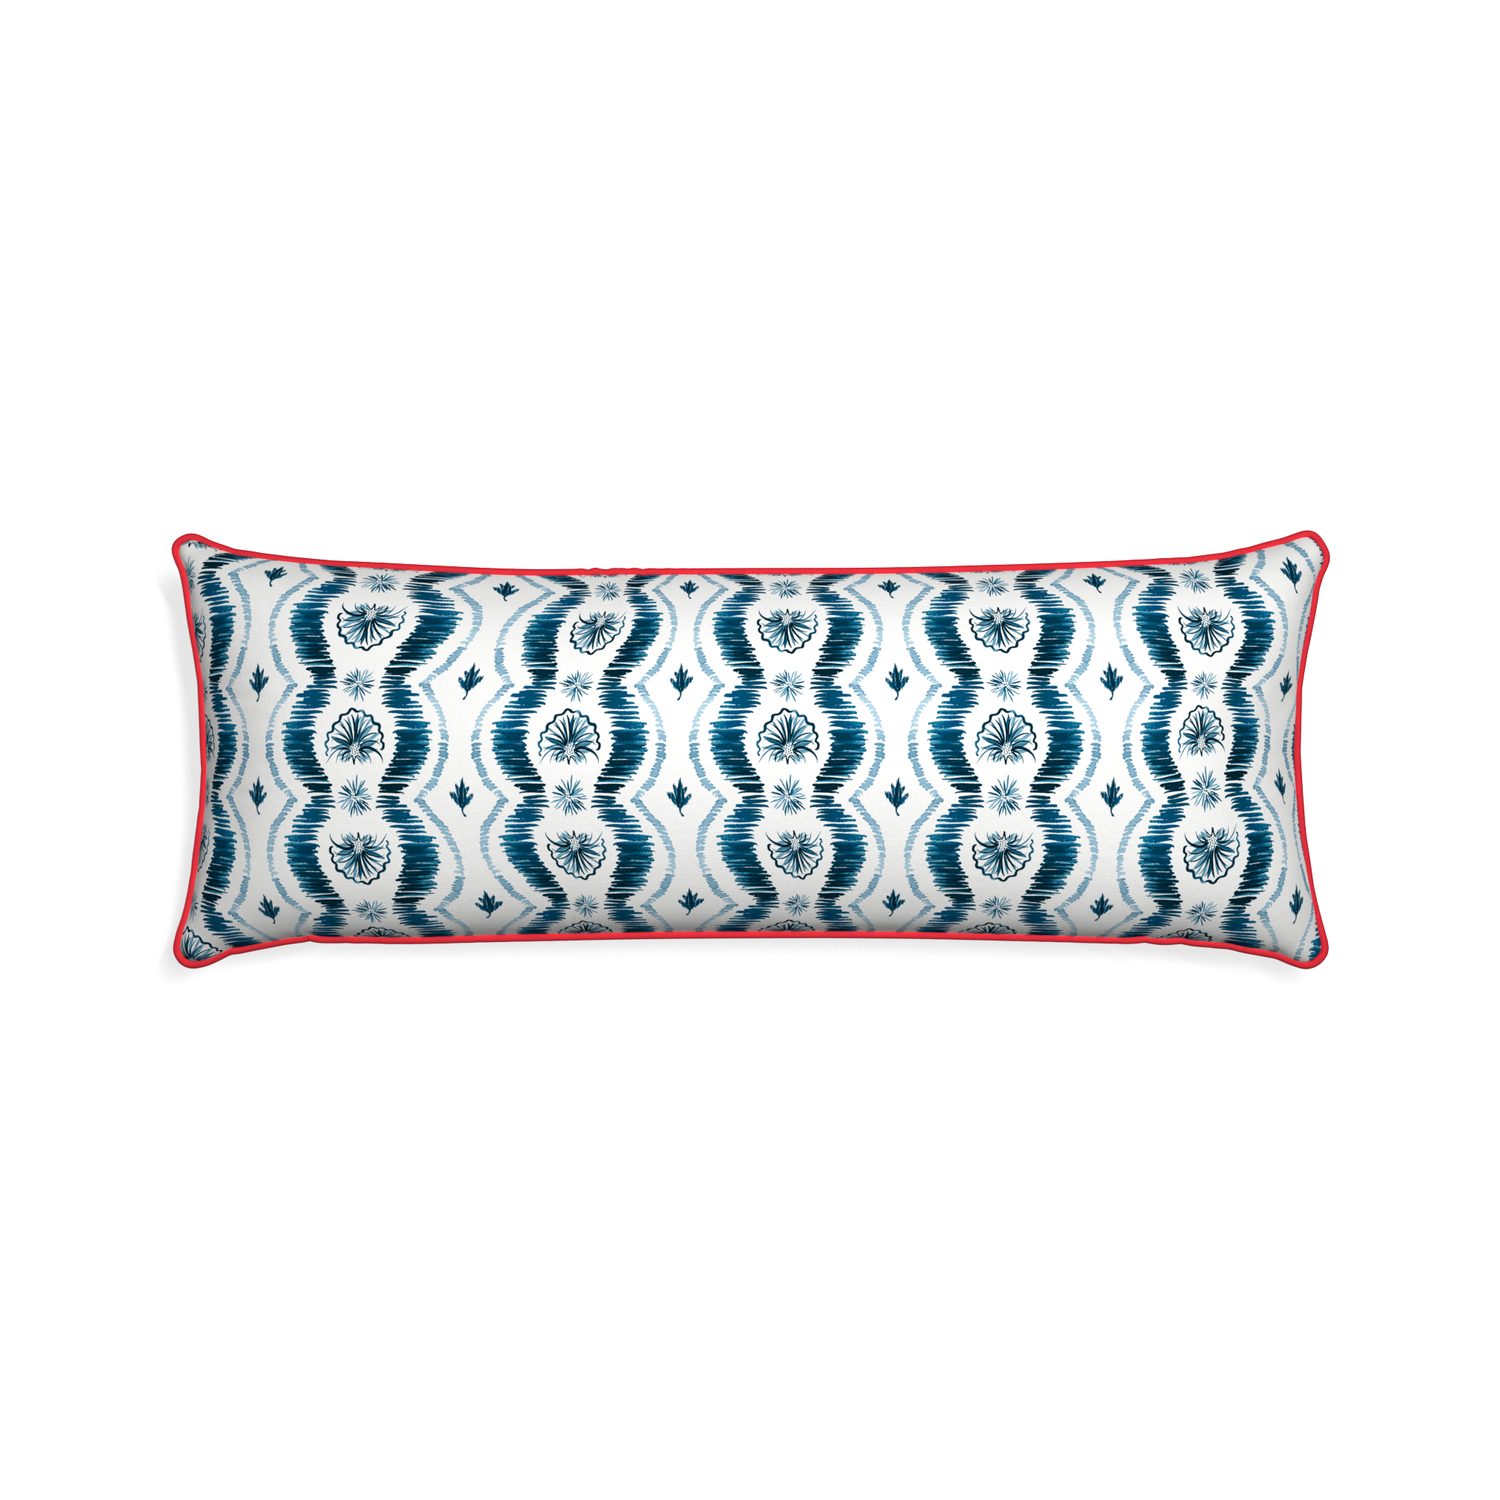 Xl-lumbar alice custom blue ikatpillow with cherry piping on white background